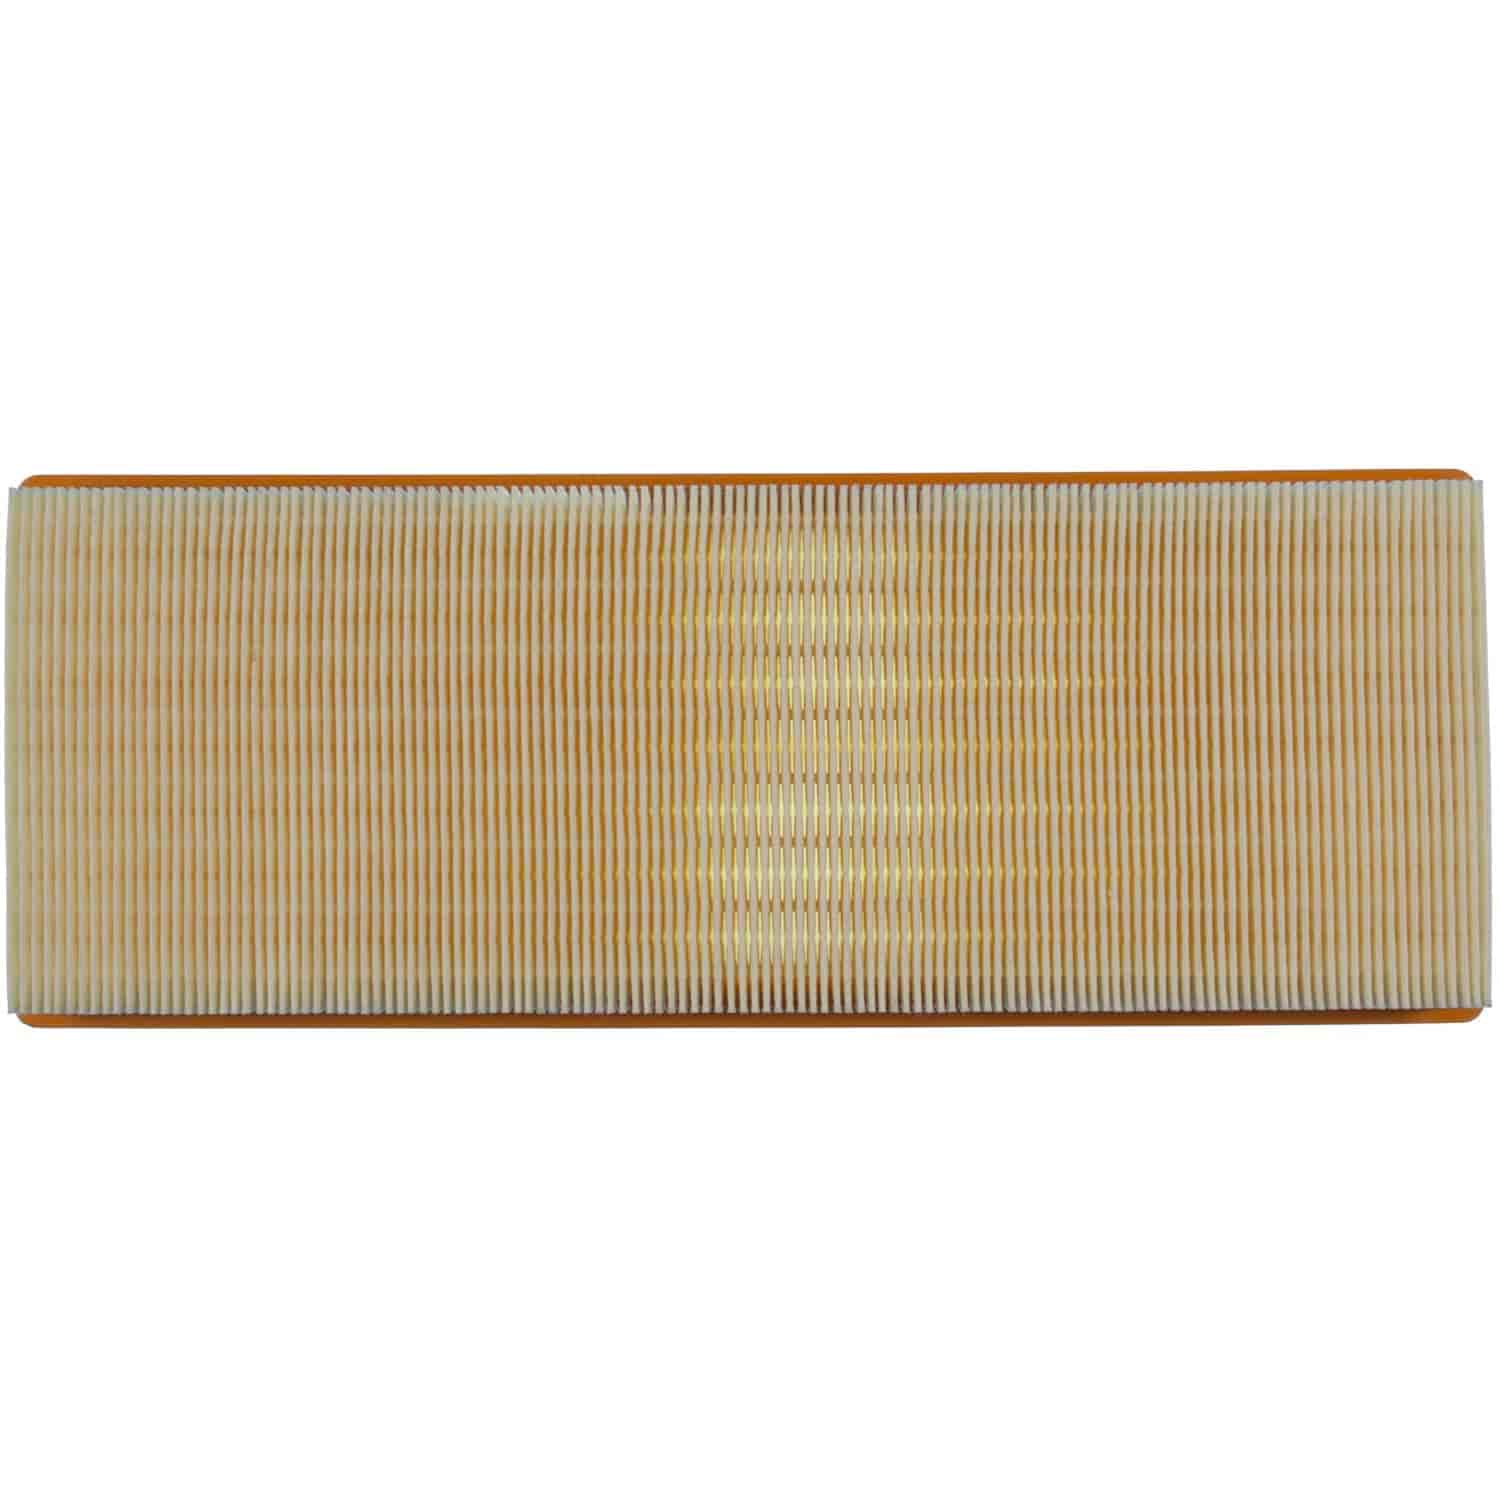 Mahle Air Filter Mercedes Benz 55 Series 5.5L 5439cc 113.991 and 113.992 engine. 2006-2011